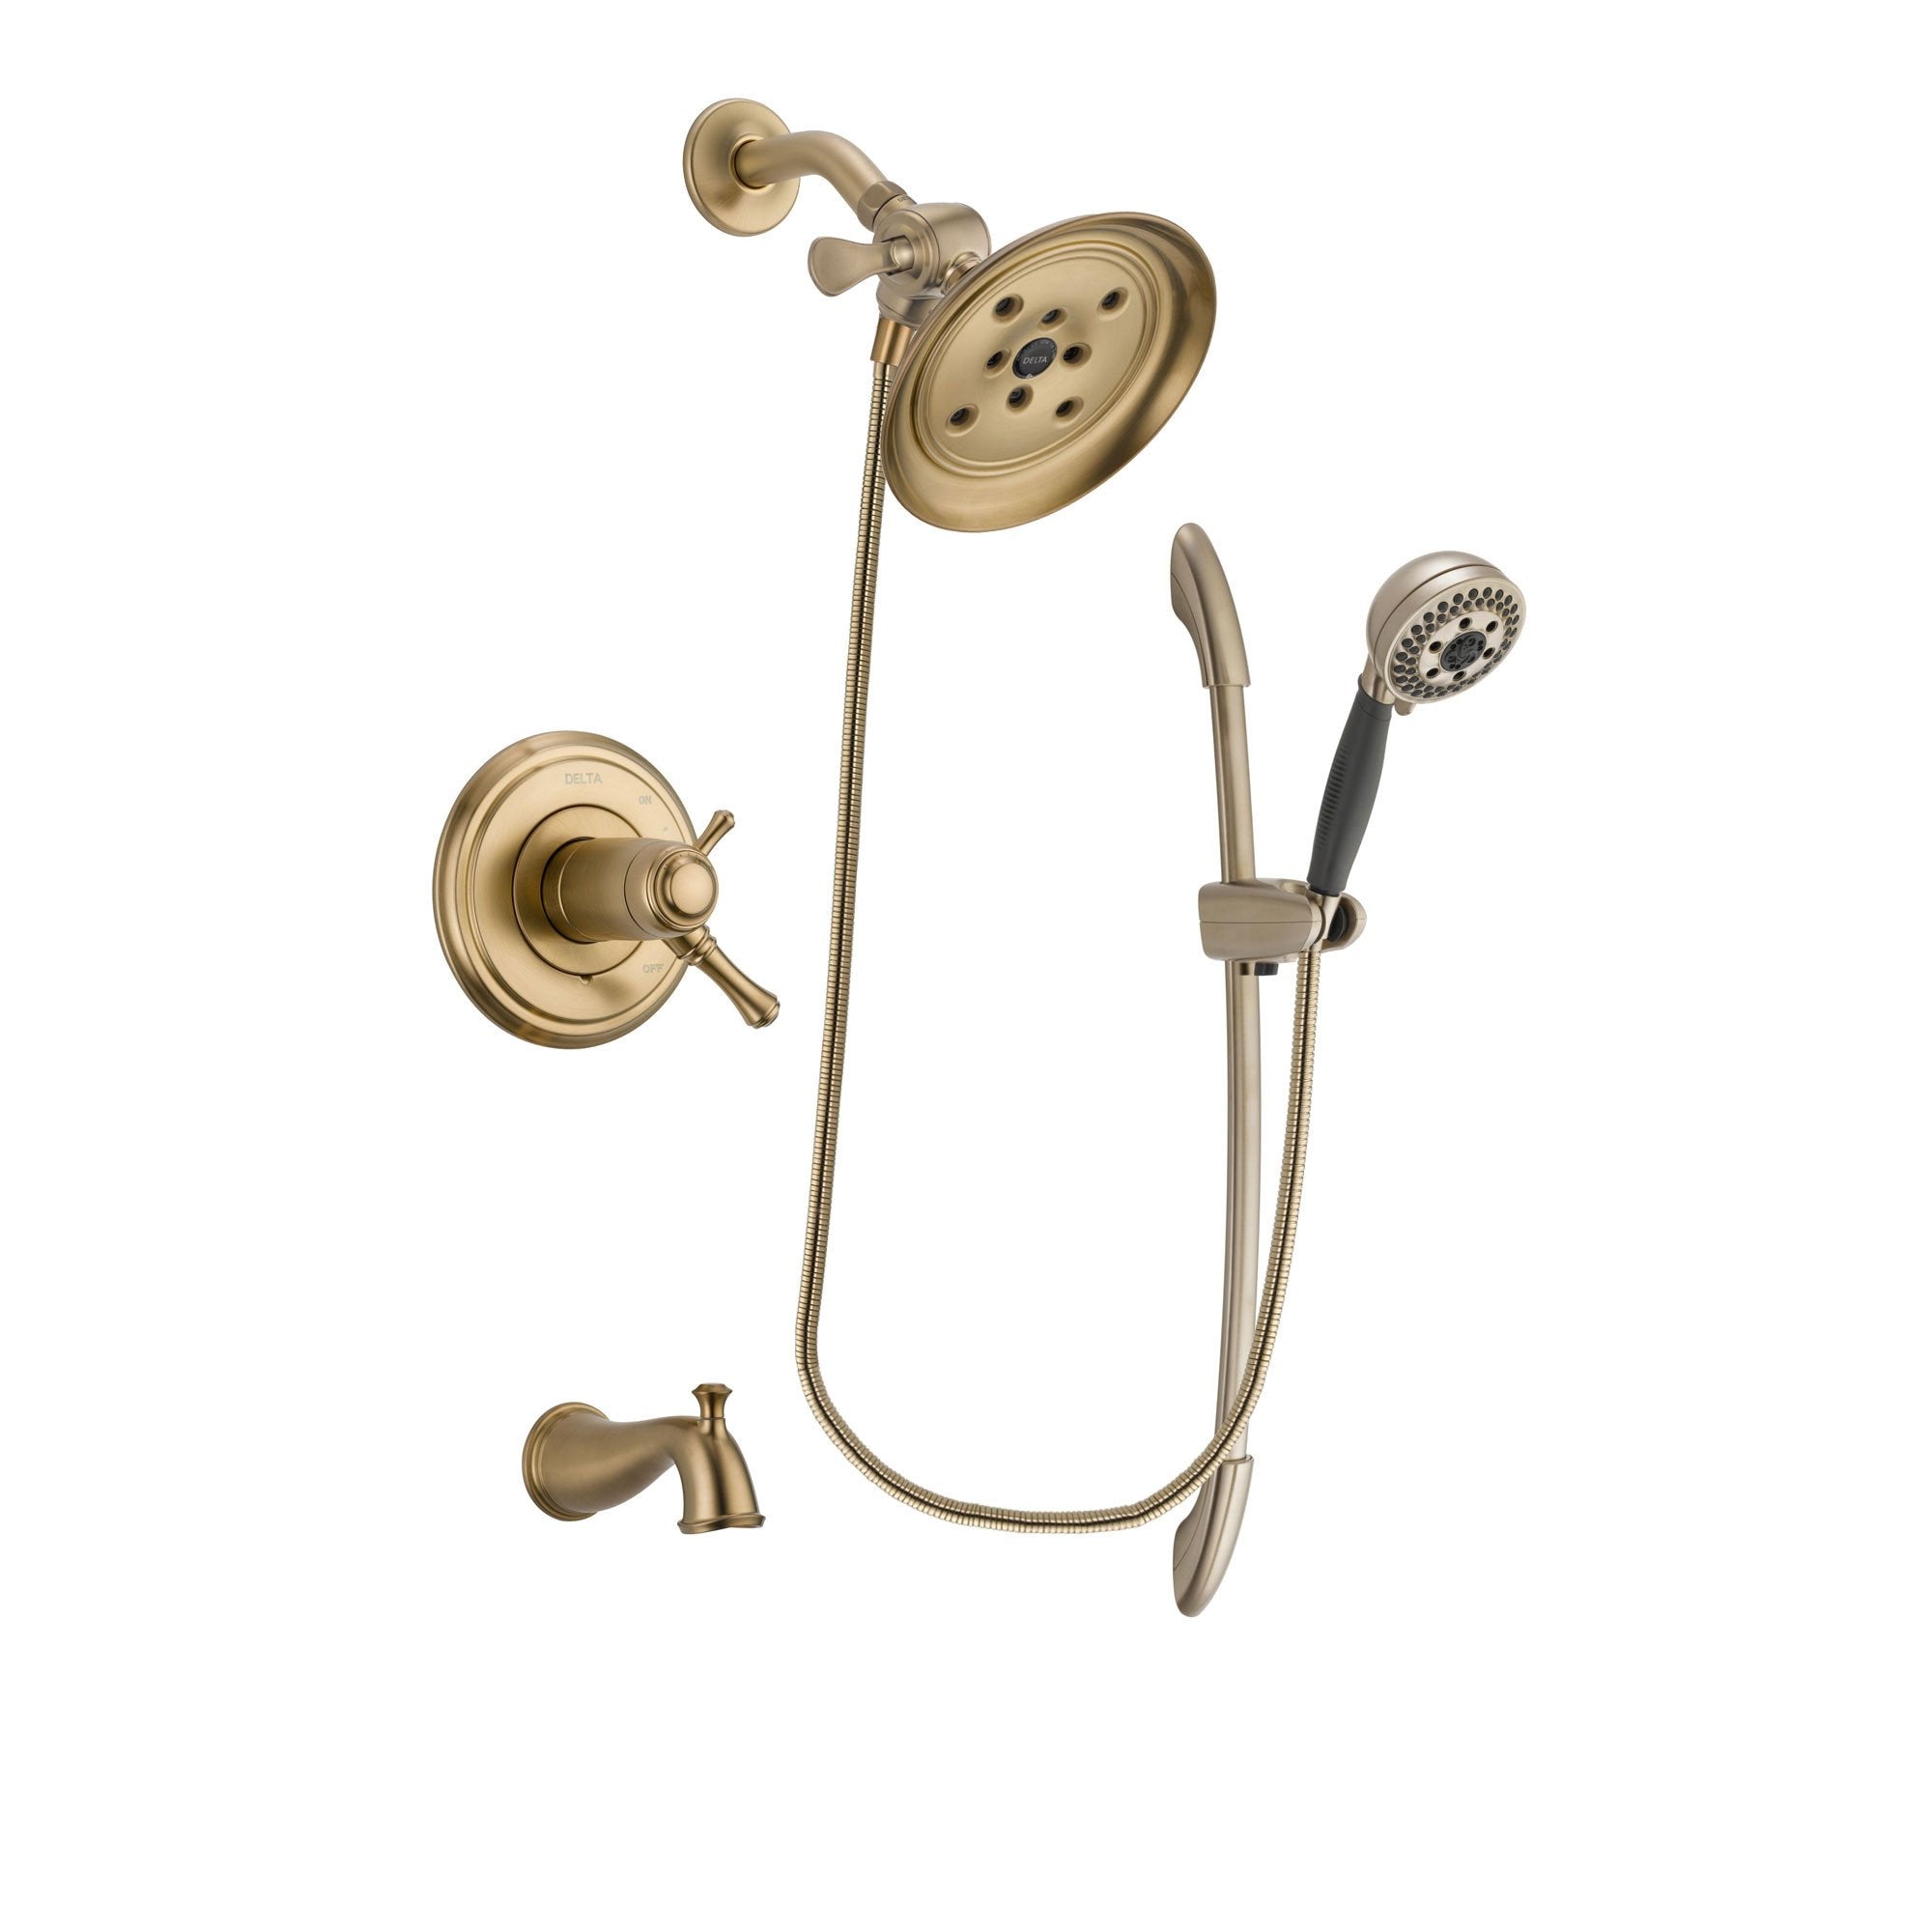 Delta Cassidy Champagne Bronze Finish Thermostatic Tub and Shower Faucet System Package with Large Rain Shower Head and 5-Spray Handshower with Slide Bar Includes Rough-in Valve and Tub Spout DSP3375V